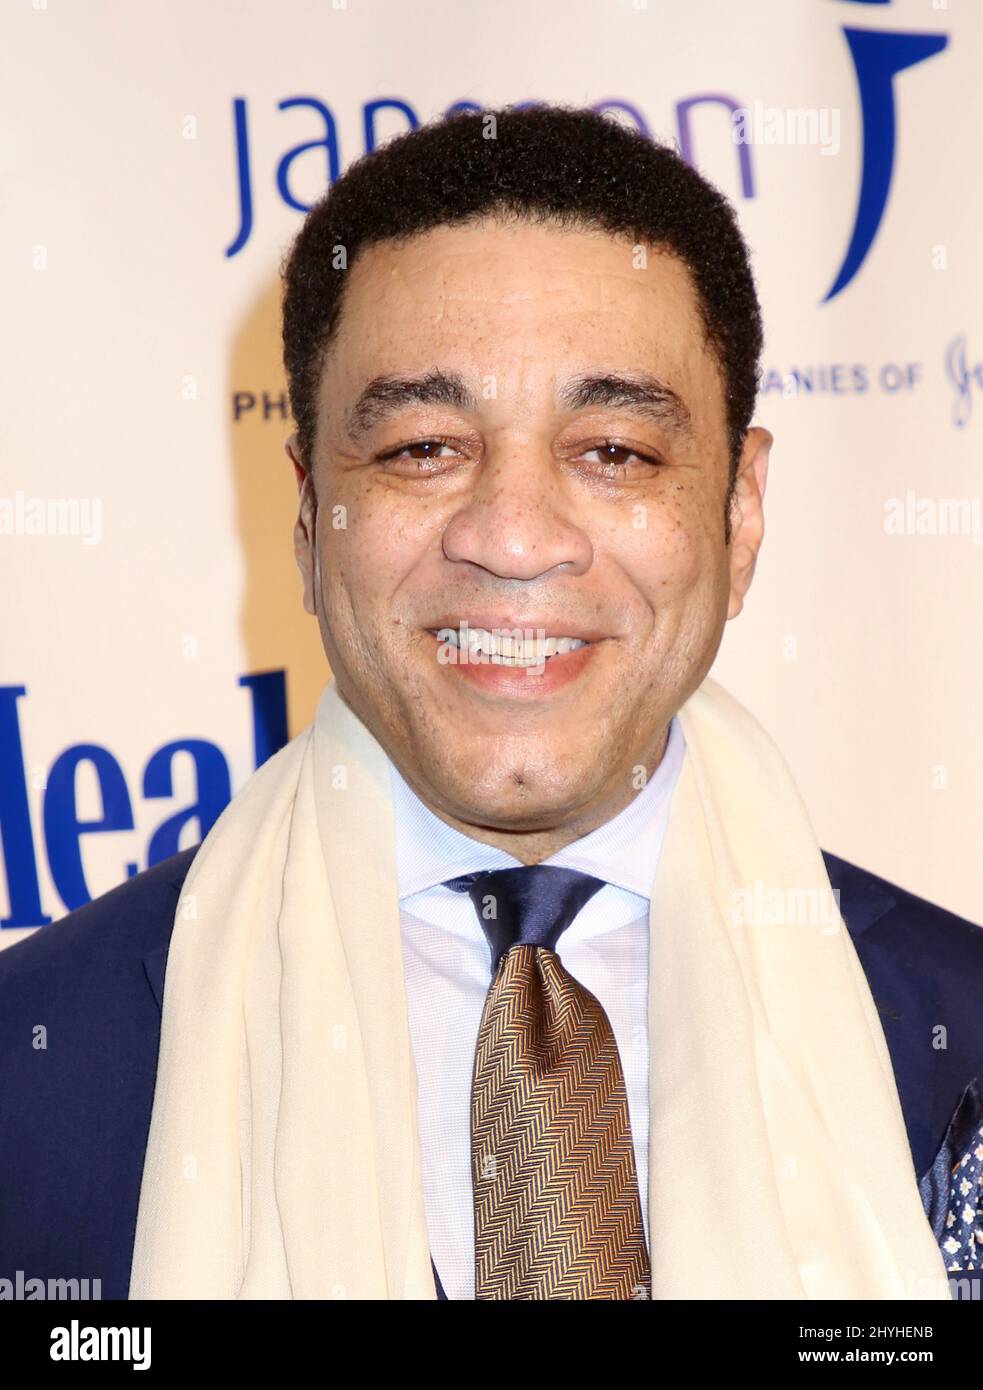 Harry Lennix attending The Third Annual Blue Jacket Fashion Show held at Pier 59 Studios on February 7, 2019 in New York City, USA. Stock Photo